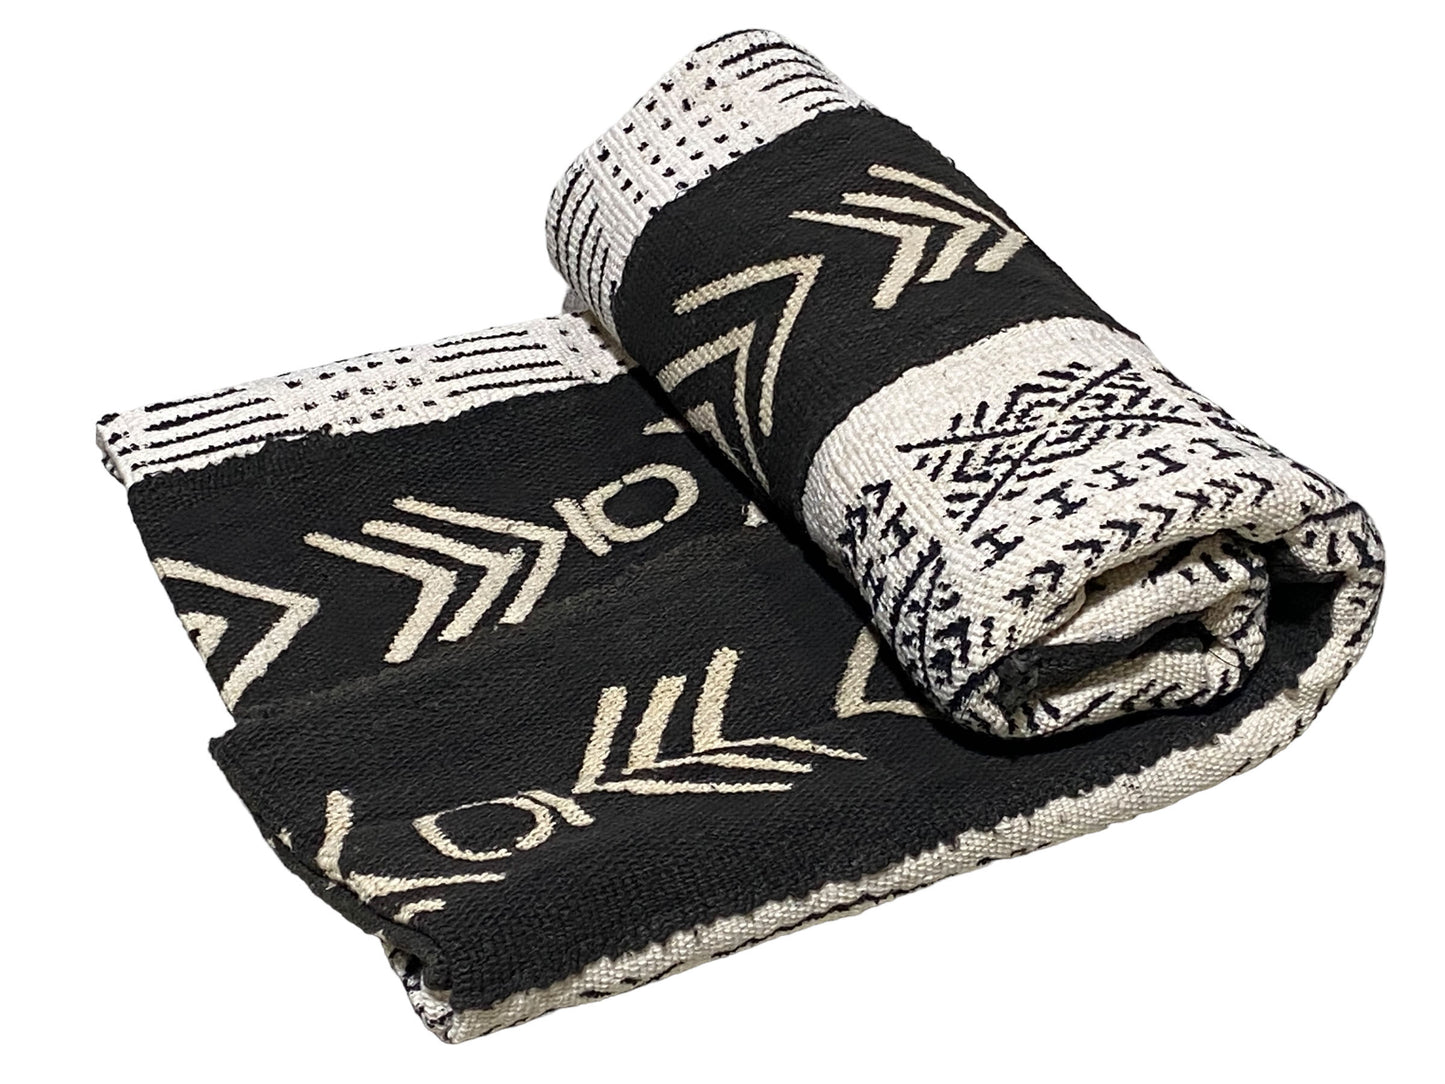 # 5731 African Black and White Mud Cloth Textile Mali 62" by 38"